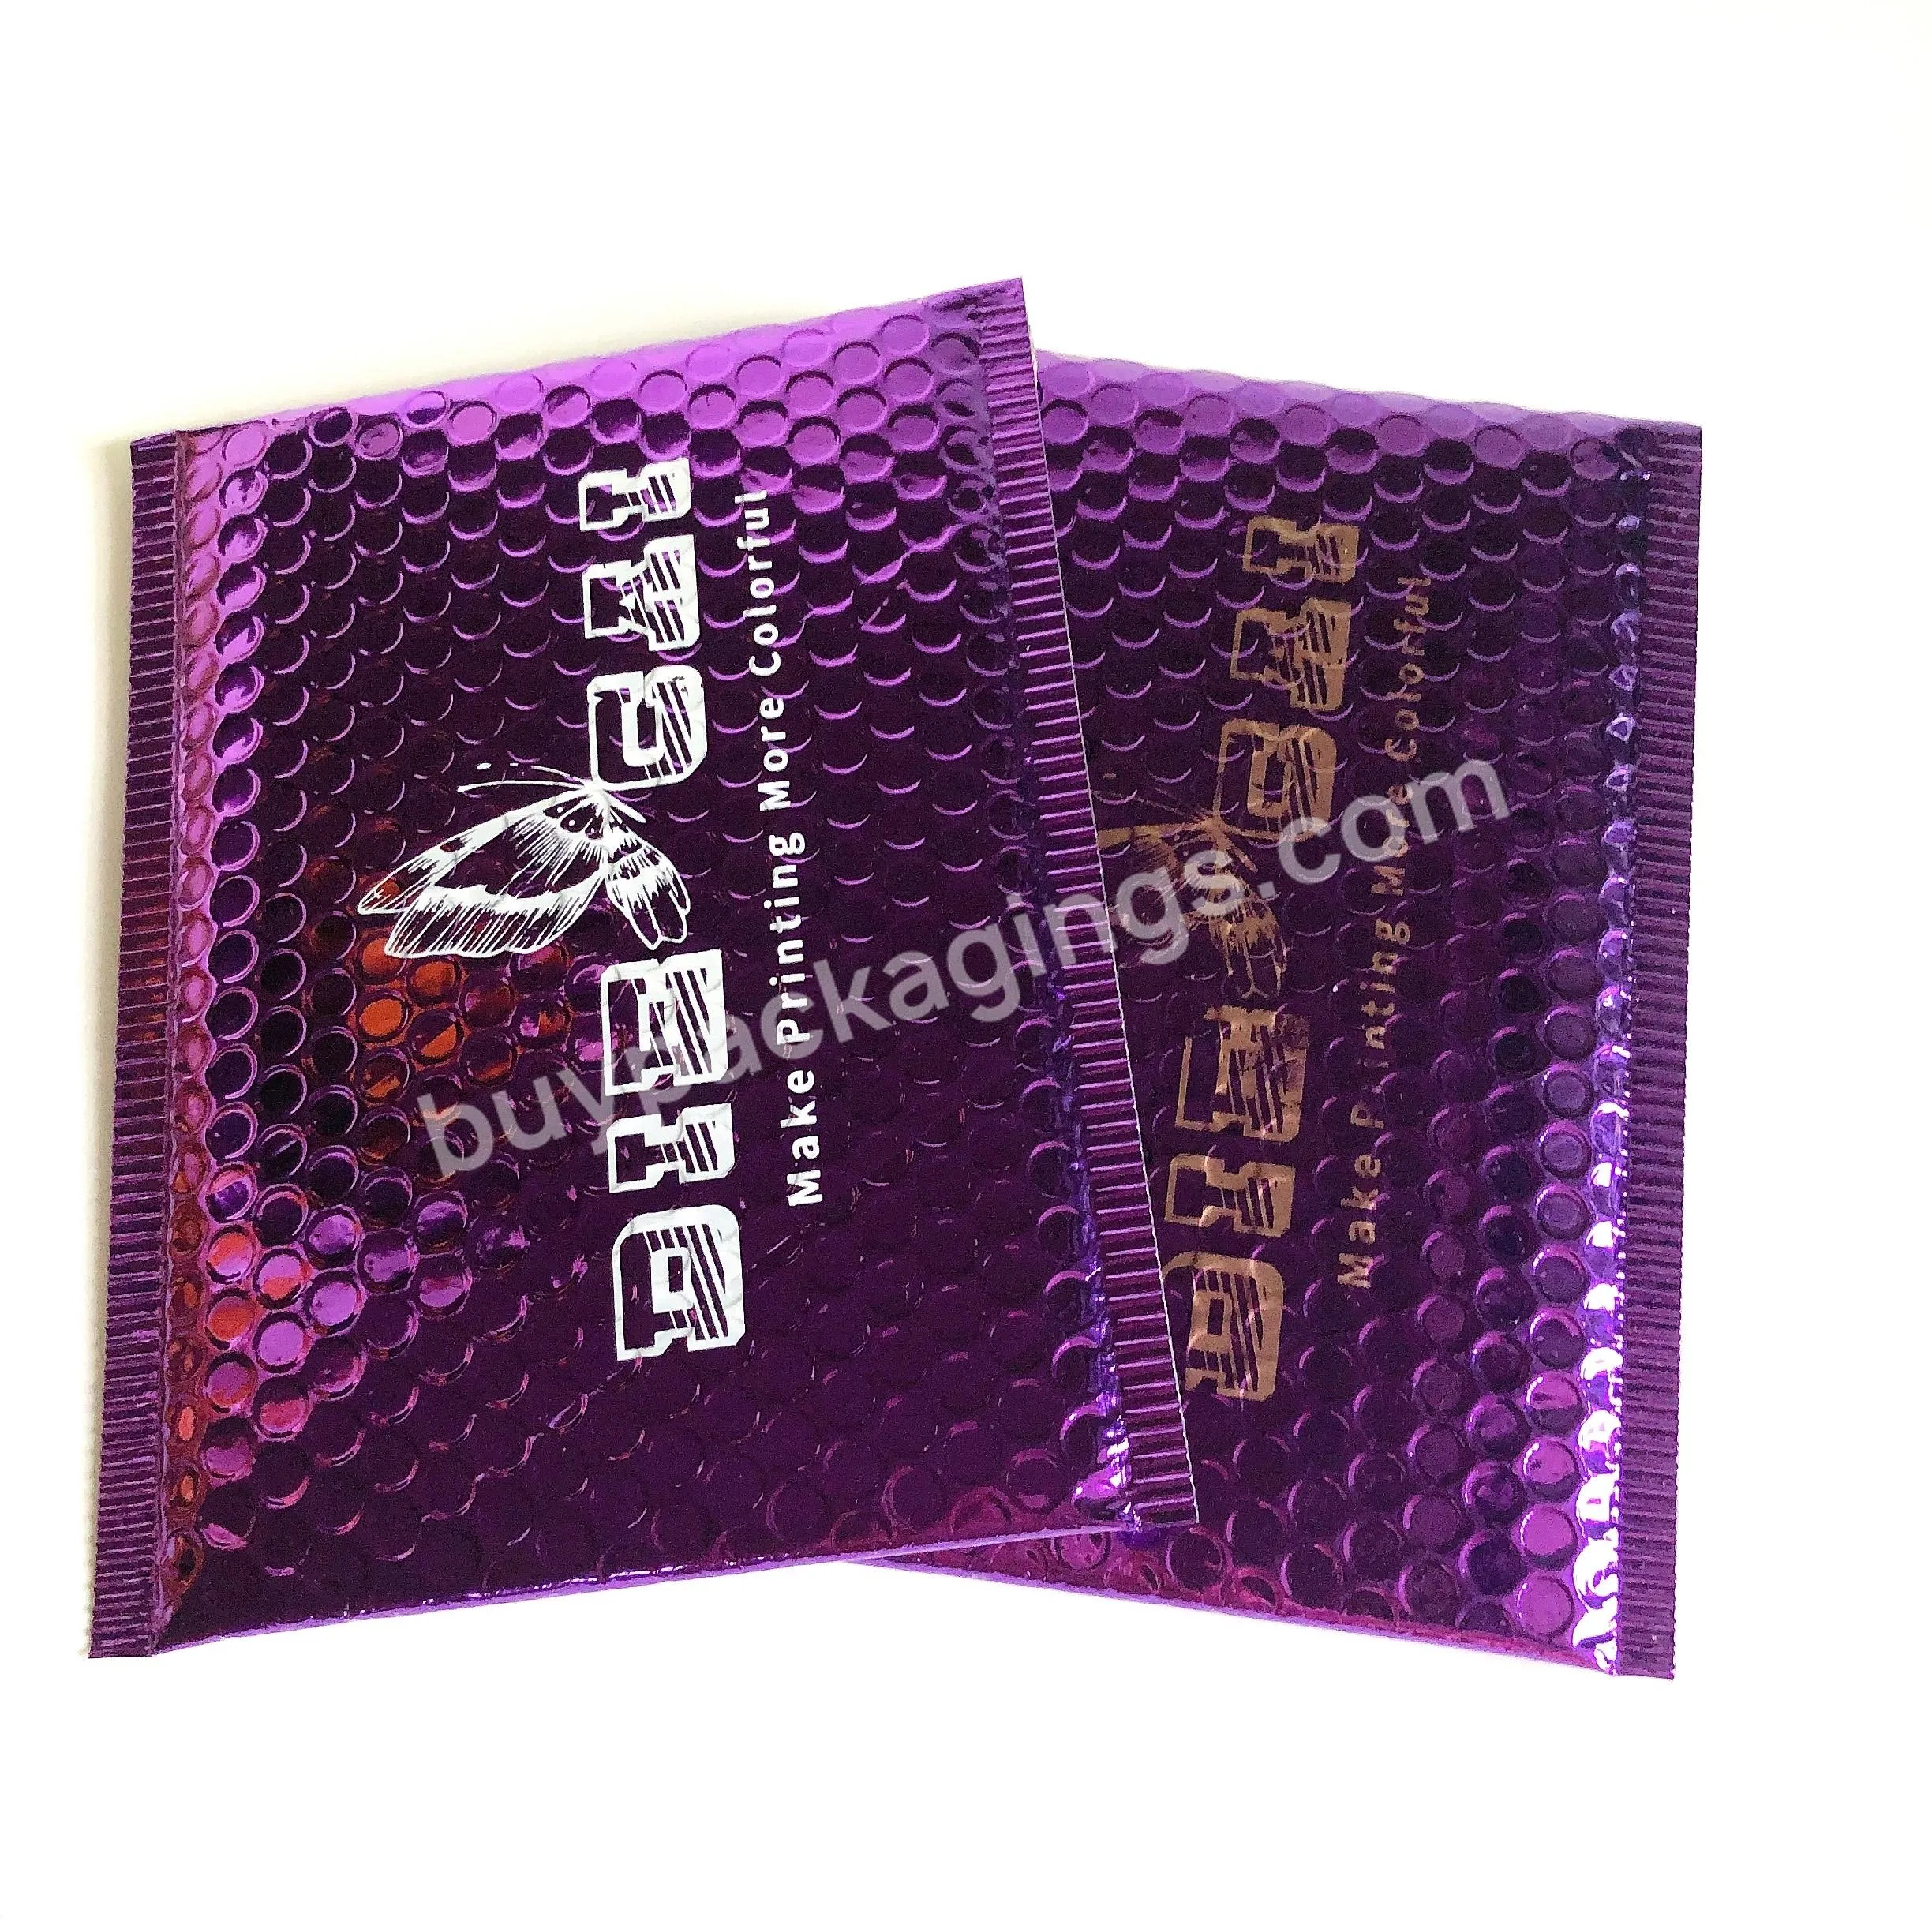 Recyclable Purple Bubble Cushioned Envelopes Bag Packaging Self Sealing Shipping Bags Black Bubble Mailers - Buy Purple Packaging Envelopes,Bag Packaging Self Sealing,Purple Bubble Cushioned Envelope.